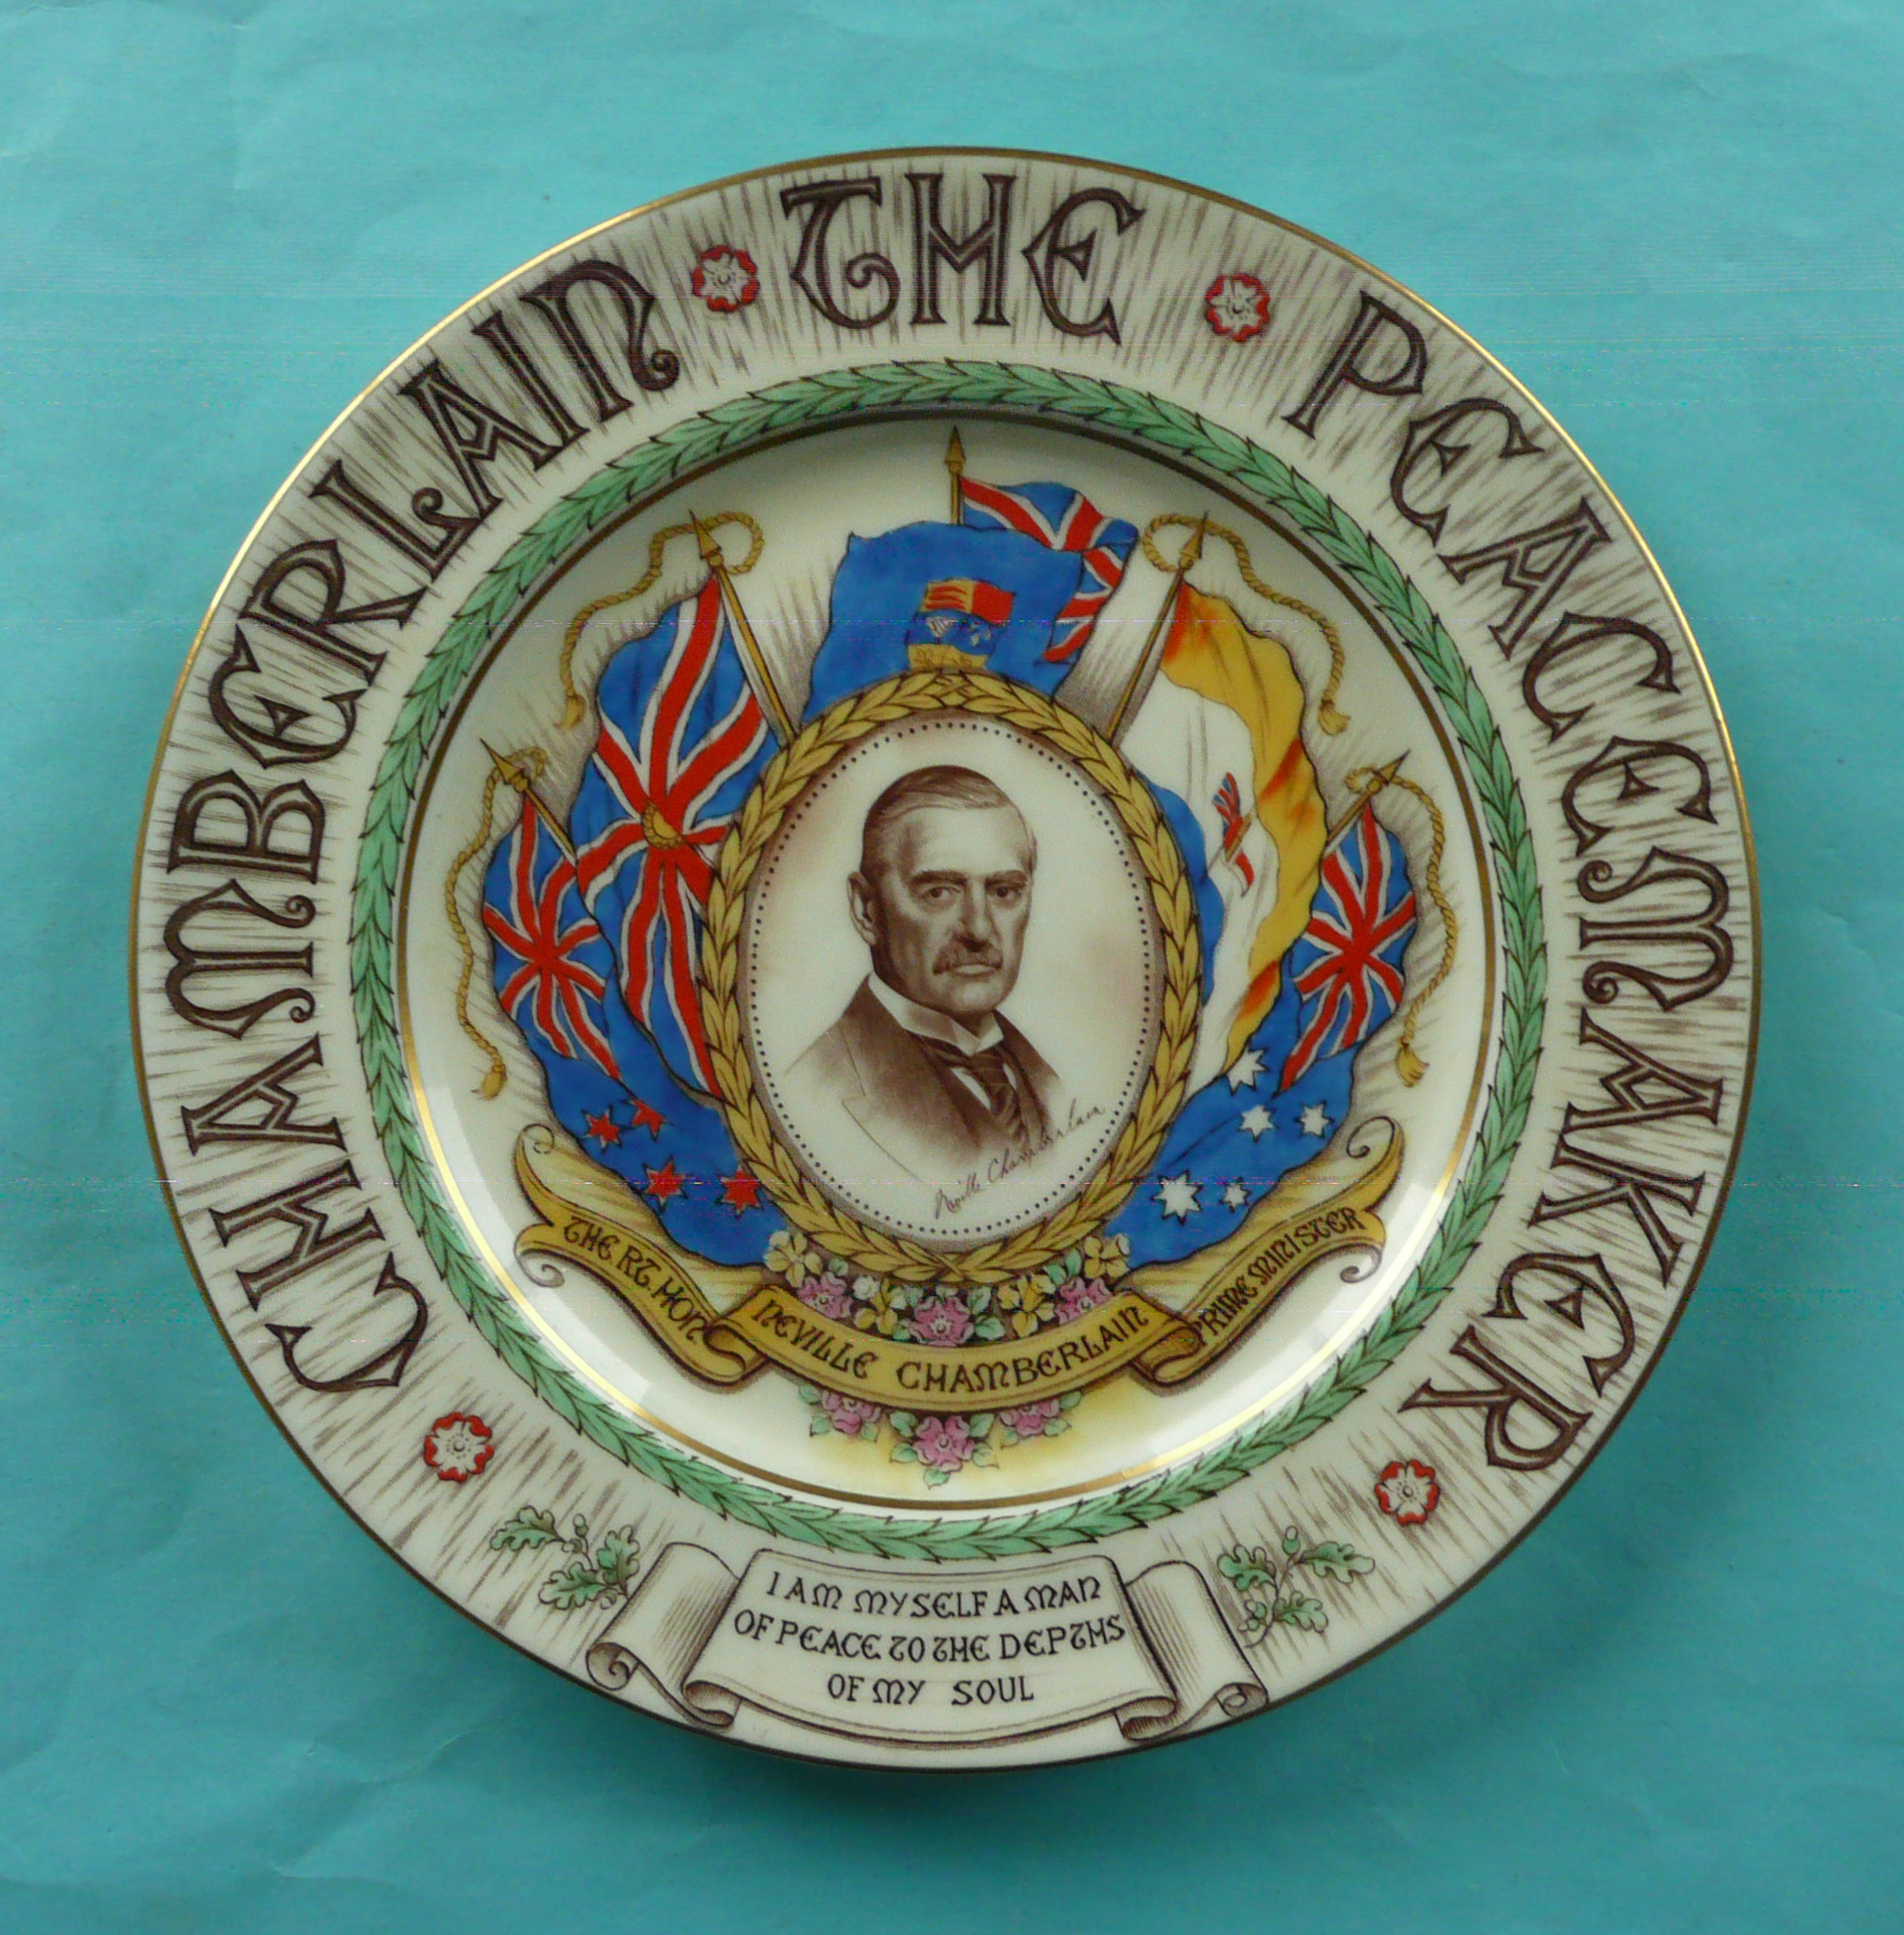 1938 Munich Peace Conference: a Paragon plate with named portrait of Chamberlain, 270mm. (